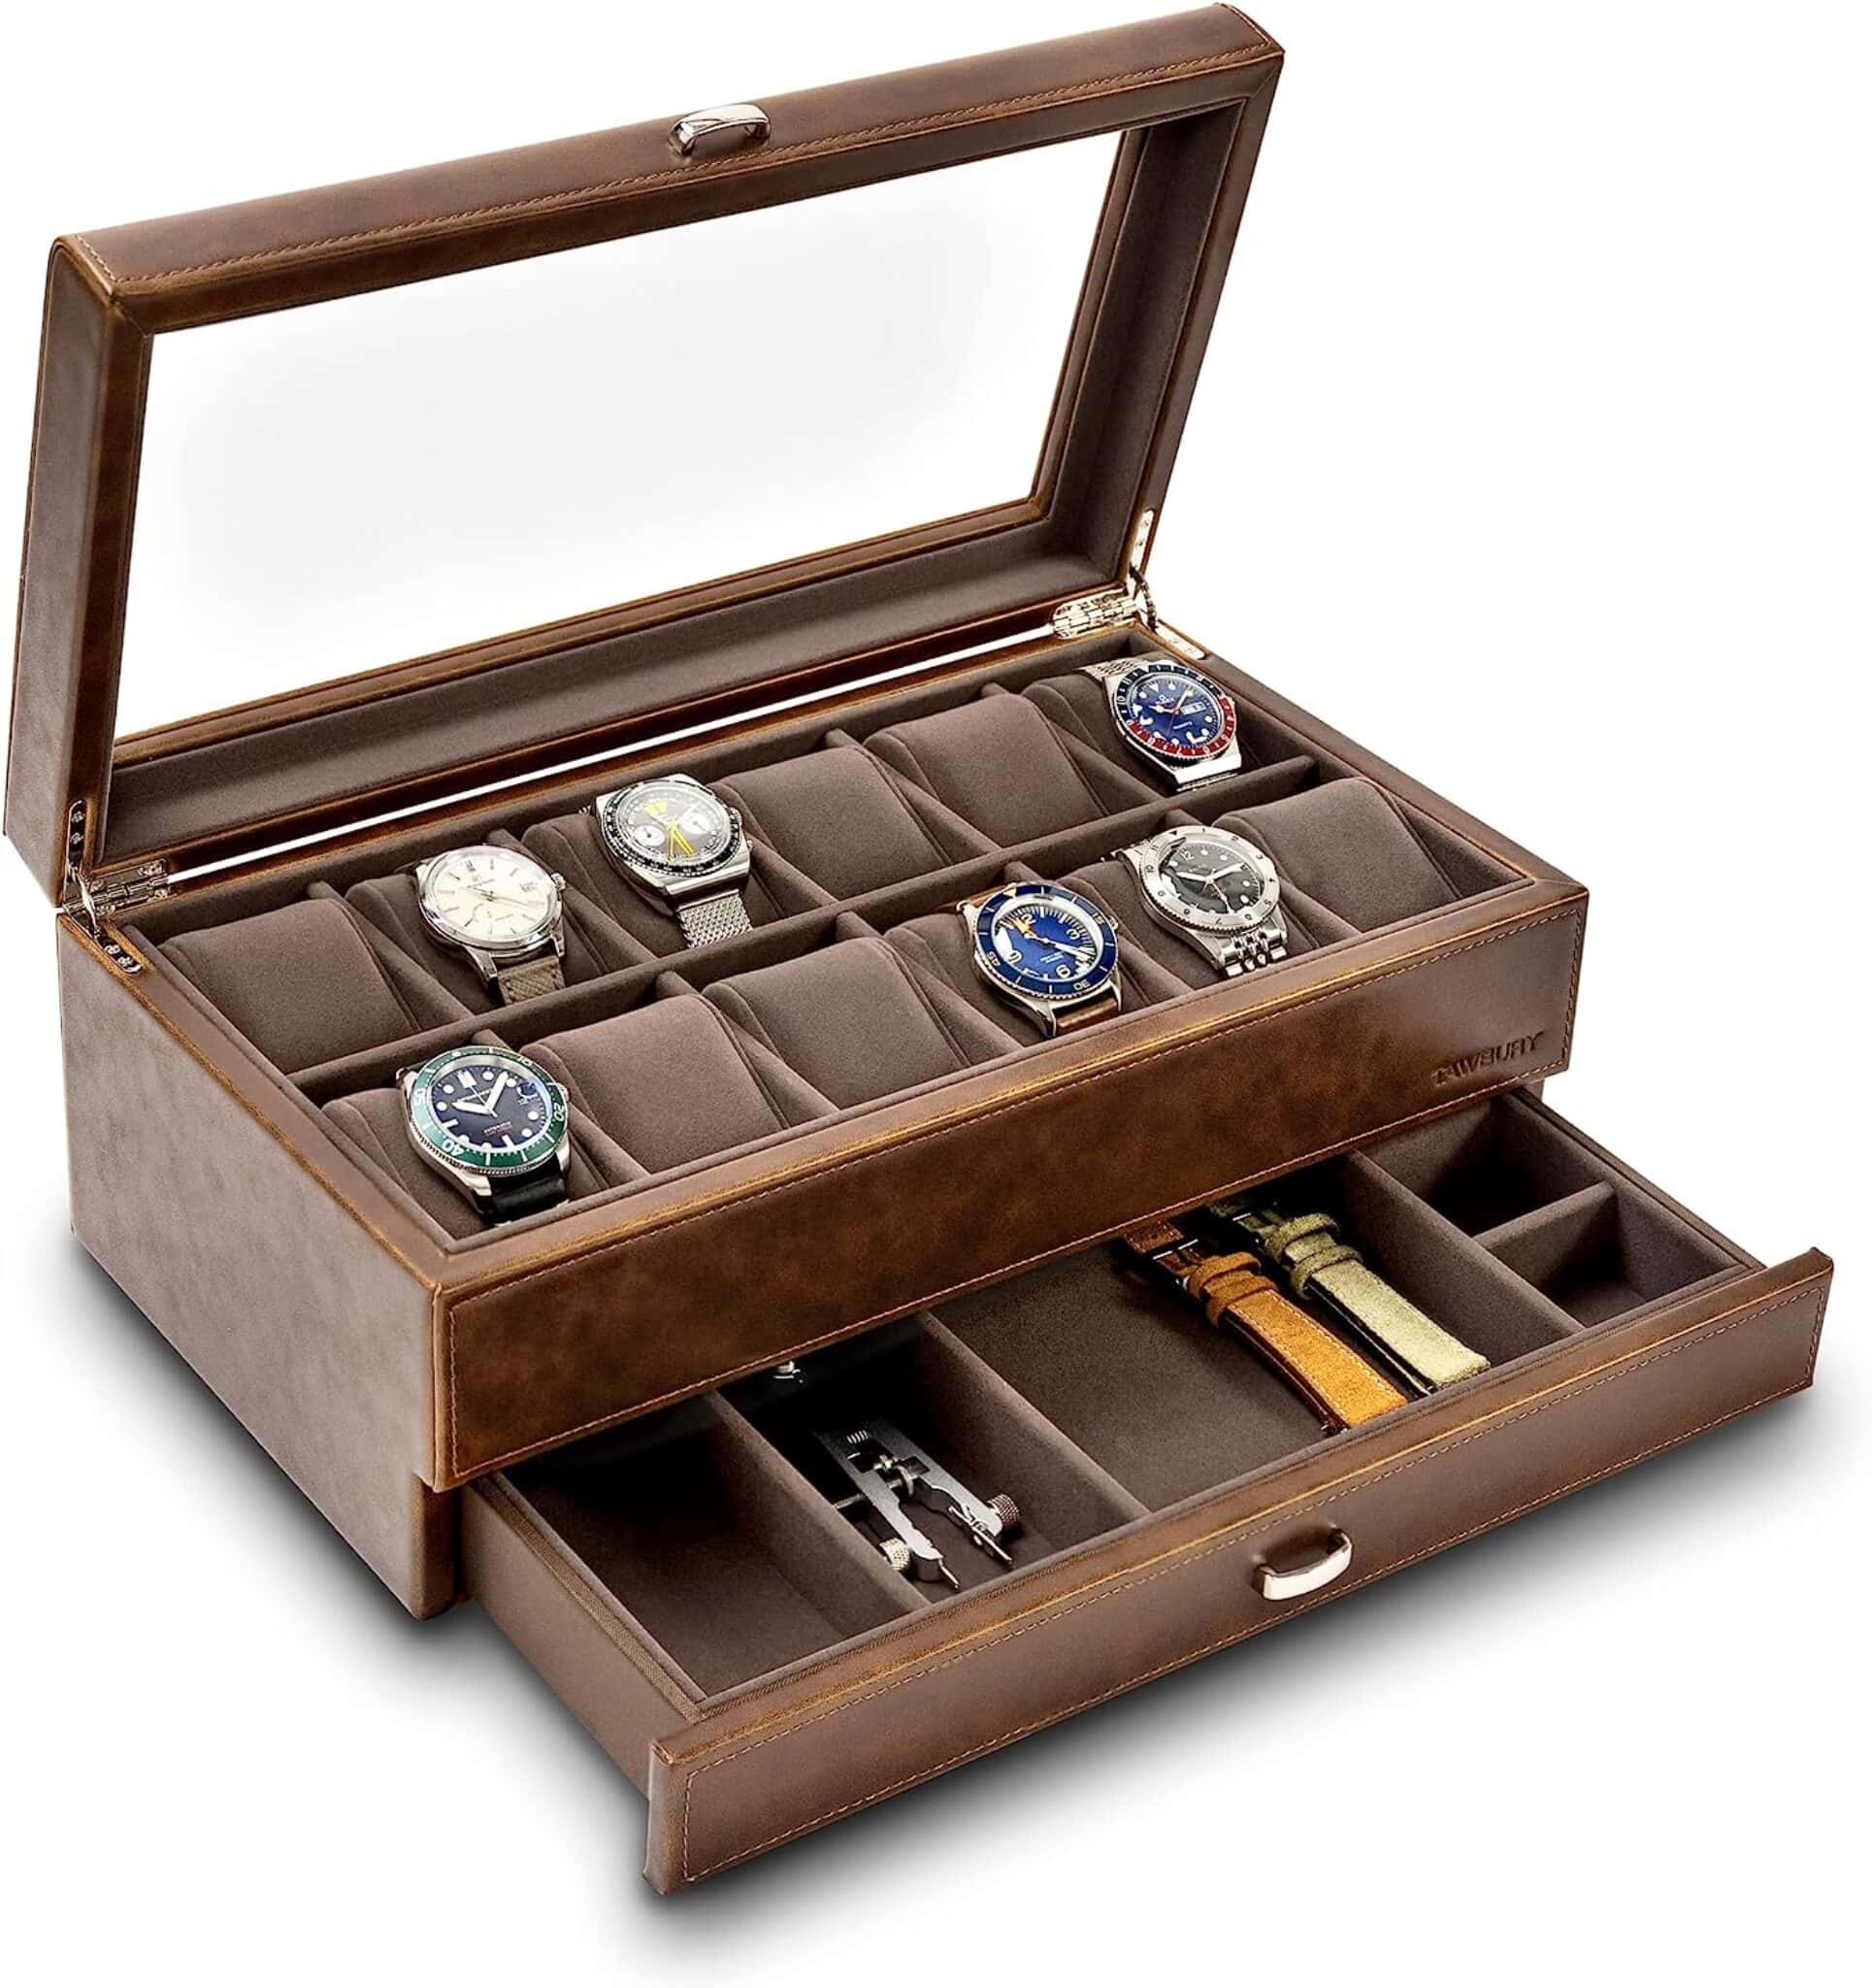 Top 20 Stylish Men’s Jewelry Boxes/Organizer Right Now